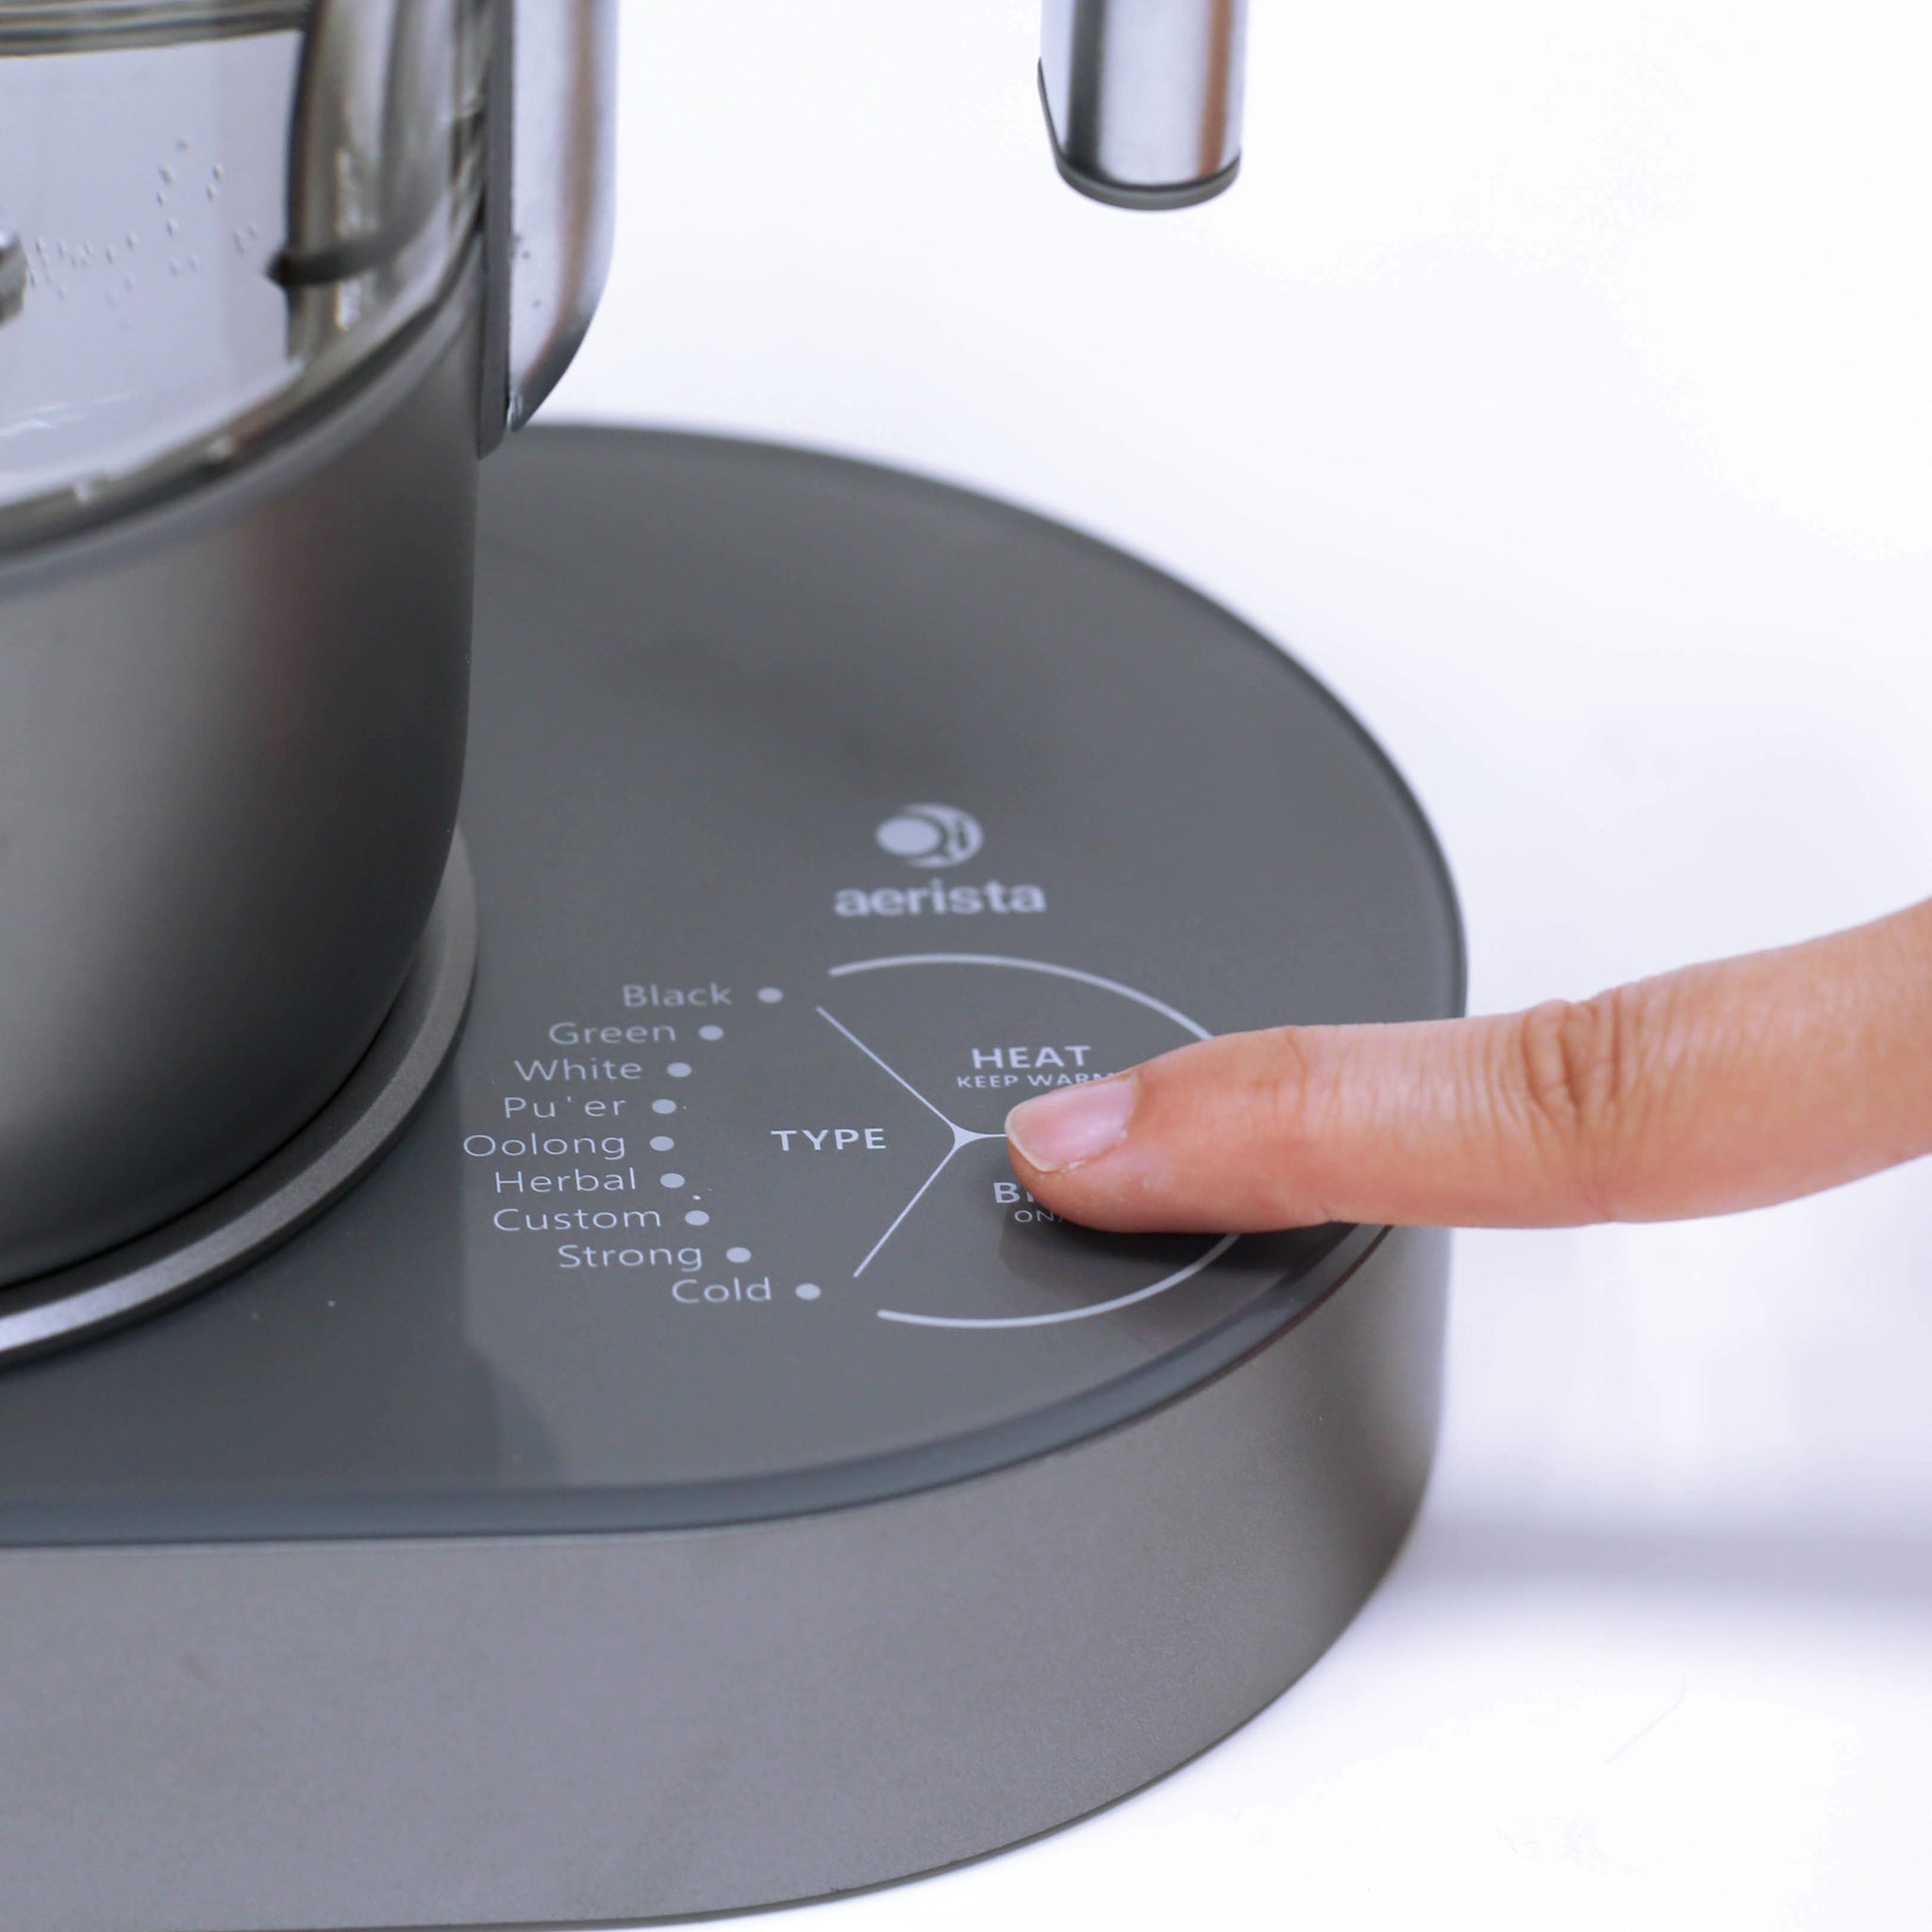 Turning on the Smart Brewer